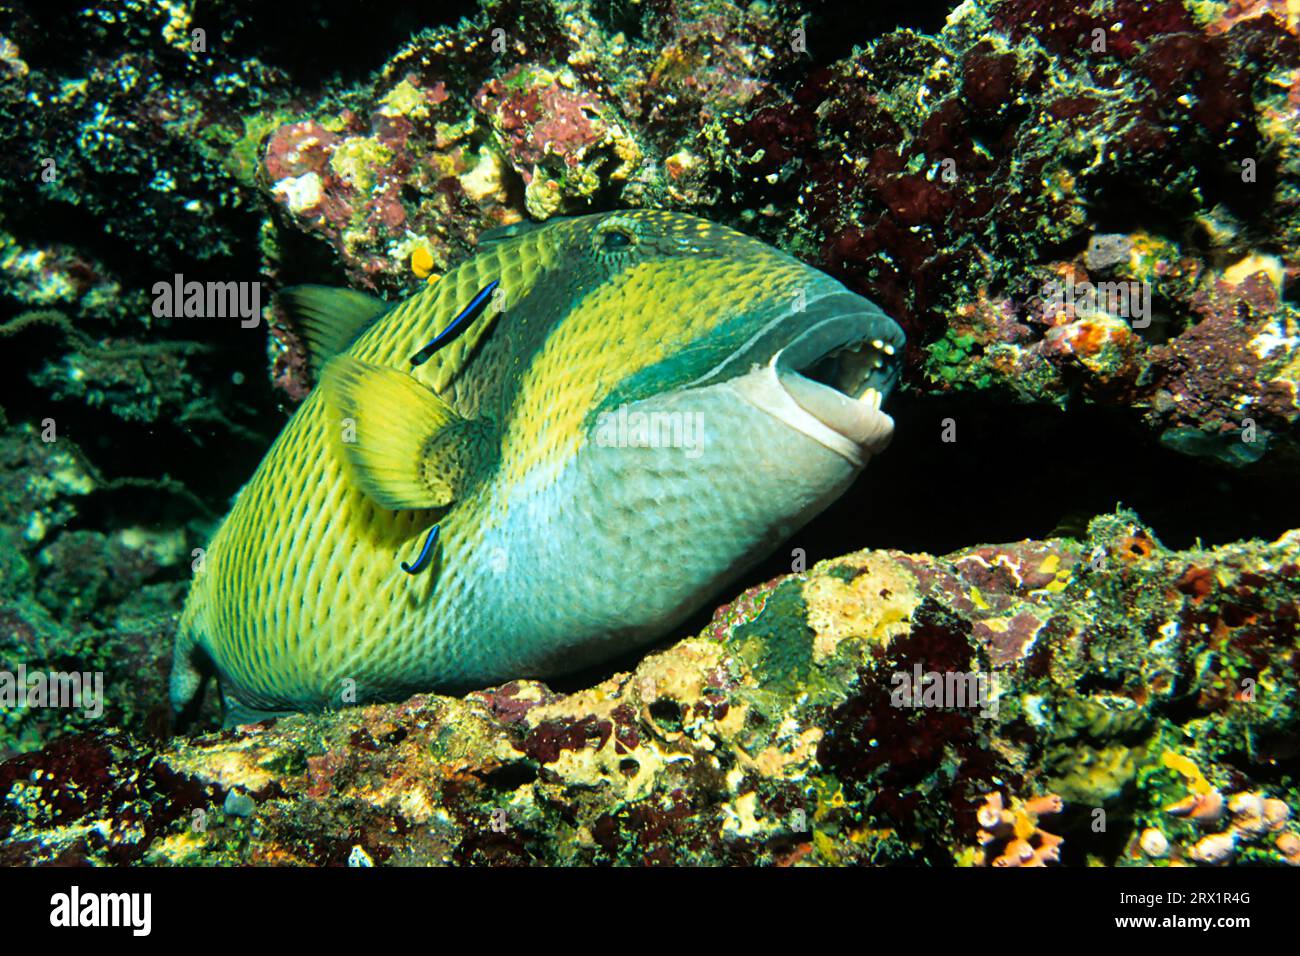 Green giant triggerfish gets cleaned by cleaner wrasses, Kuredu, Maldives, Lhaviyani Atoll Stock Photo